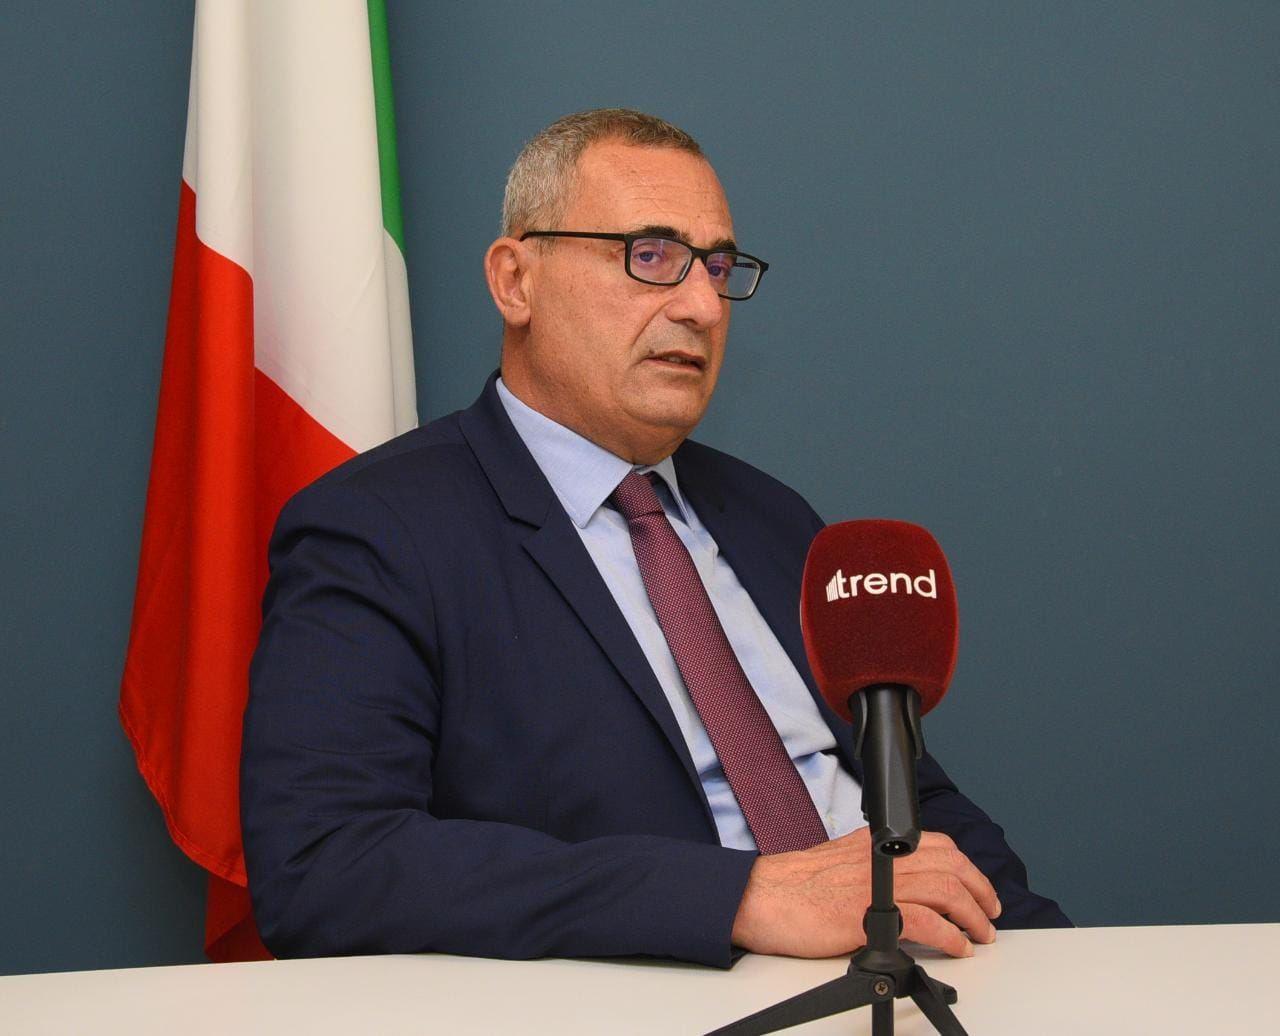 Business Mission From Italian Regions To Visit Azerbaijan To Build Connections - ITA Director (Interview)